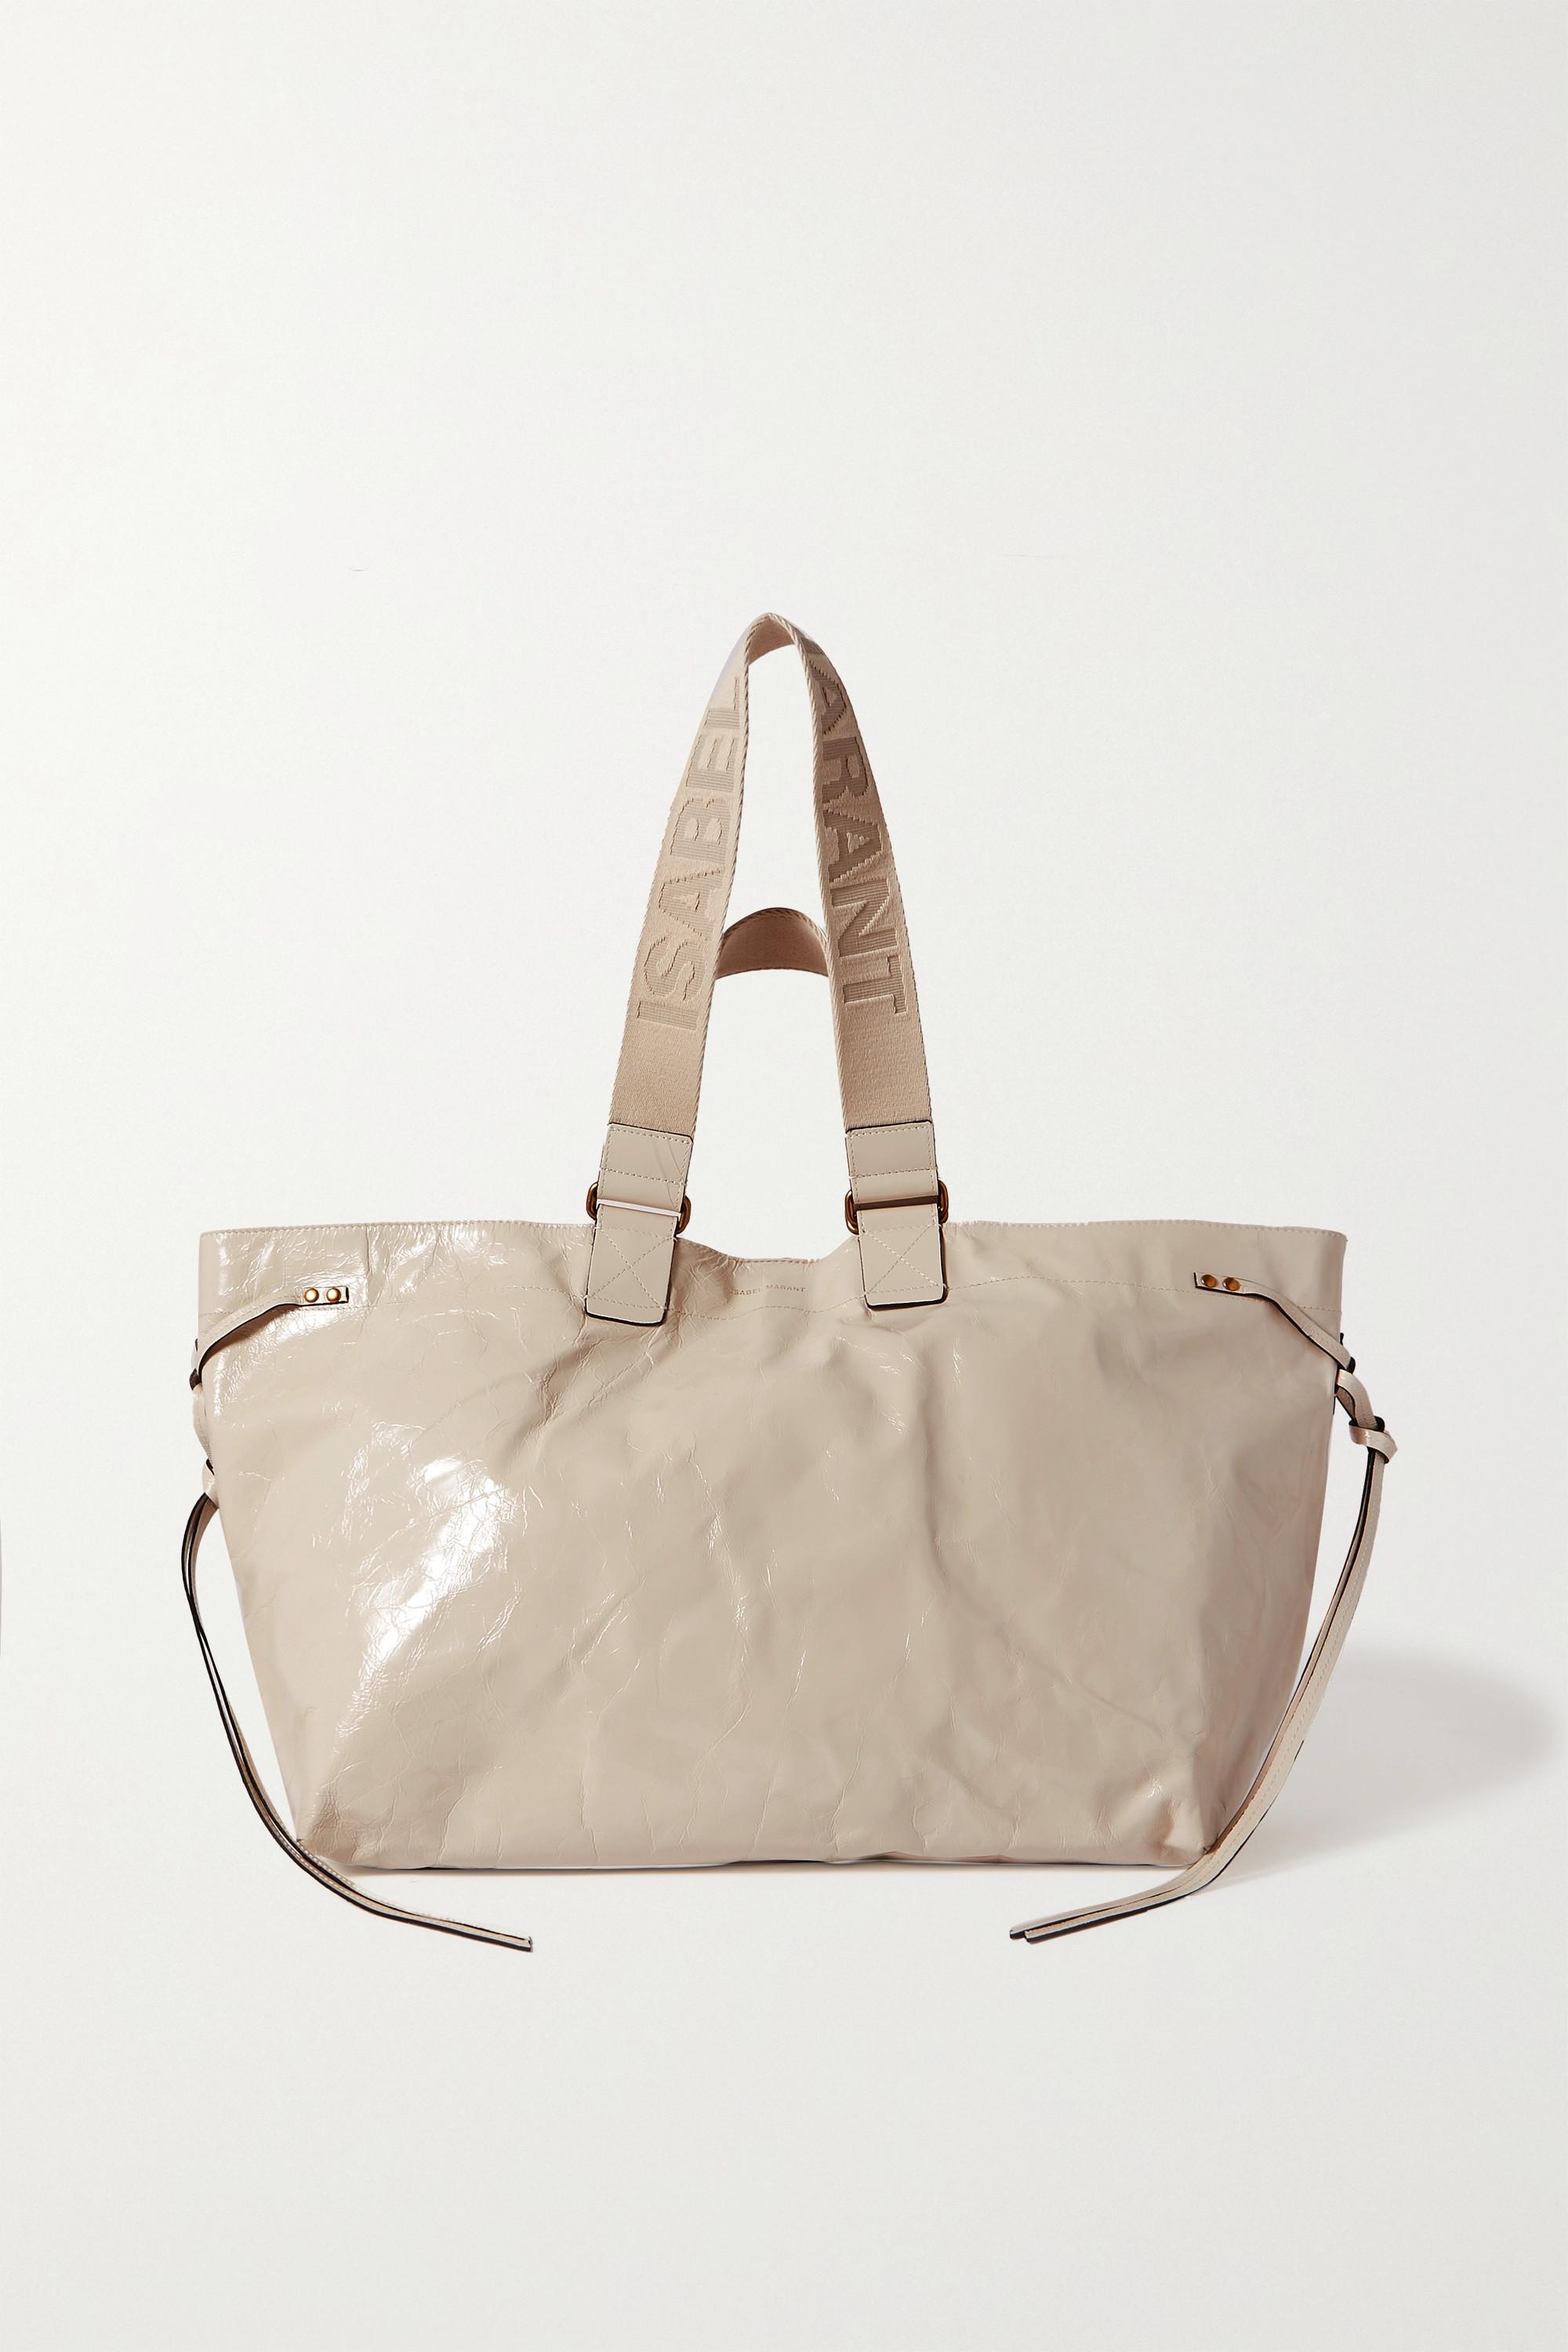 pedal kompensation Tarmfunktion Isabel Marant Wardy Patent-leather Tote in Natural | Lyst